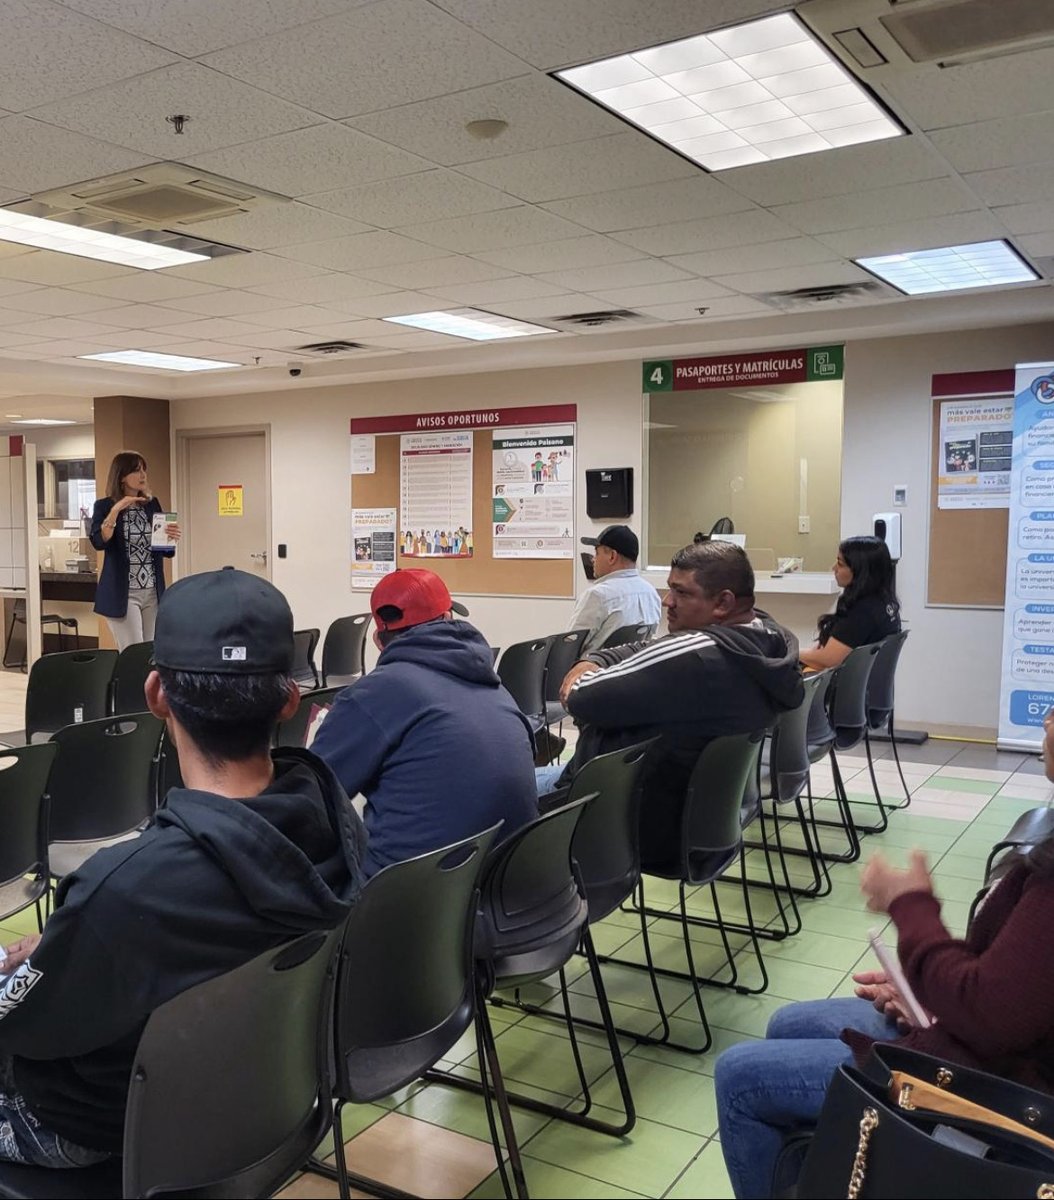 🙌#ThankfulThursday Prospera participated today in the Financial Week event hosted by the Consulate General of Mexico in Atlanta. We had the opportunity to share the basic steps to start a business. Thanks to the Consulate once again. 
#ProsperaUSA #emprender #CONSULADOMEXICANO